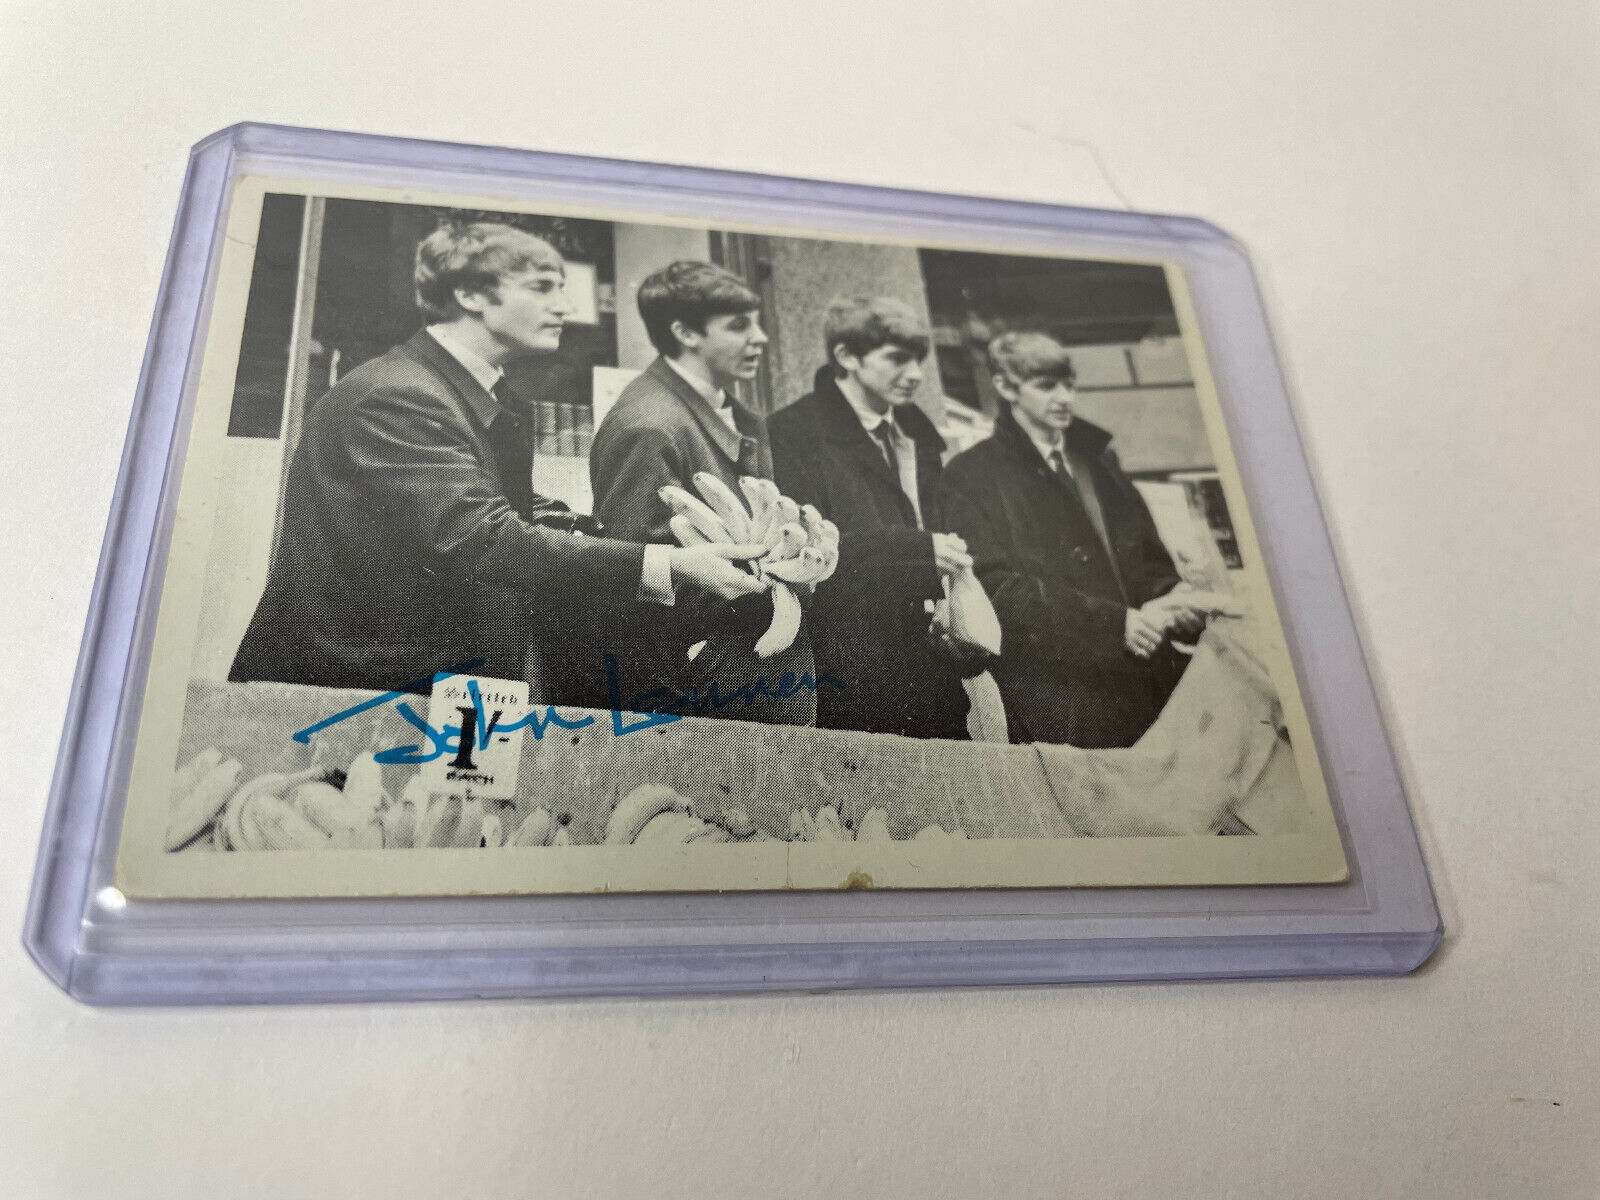 The Beatles US Original Topps 1960's B&W Trading Card Series 1 #5 Signed Lennon